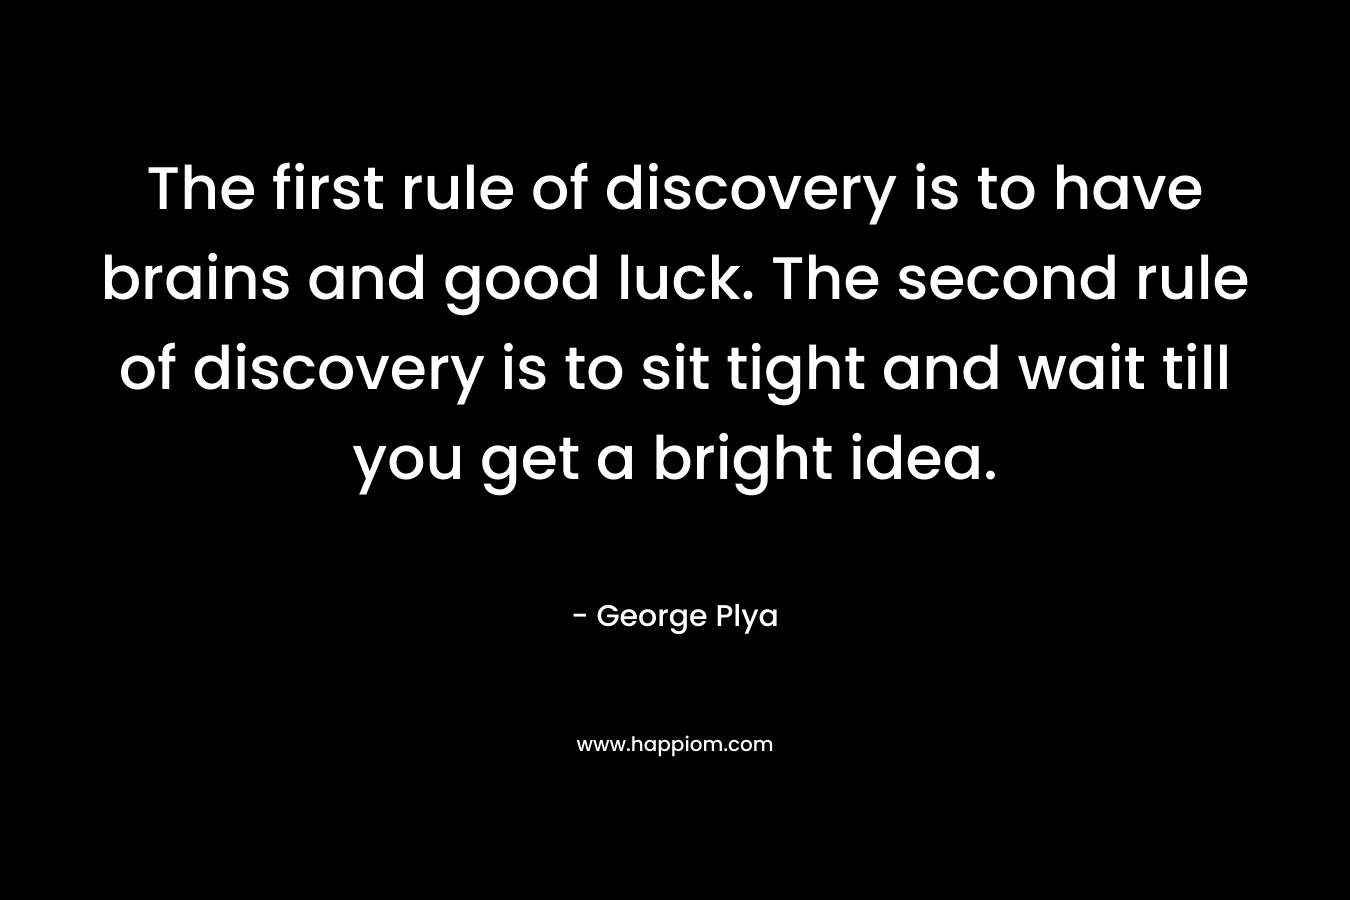 The first rule of discovery is to have brains and good luck. The second rule of discovery is to sit tight and wait till you get a bright idea.